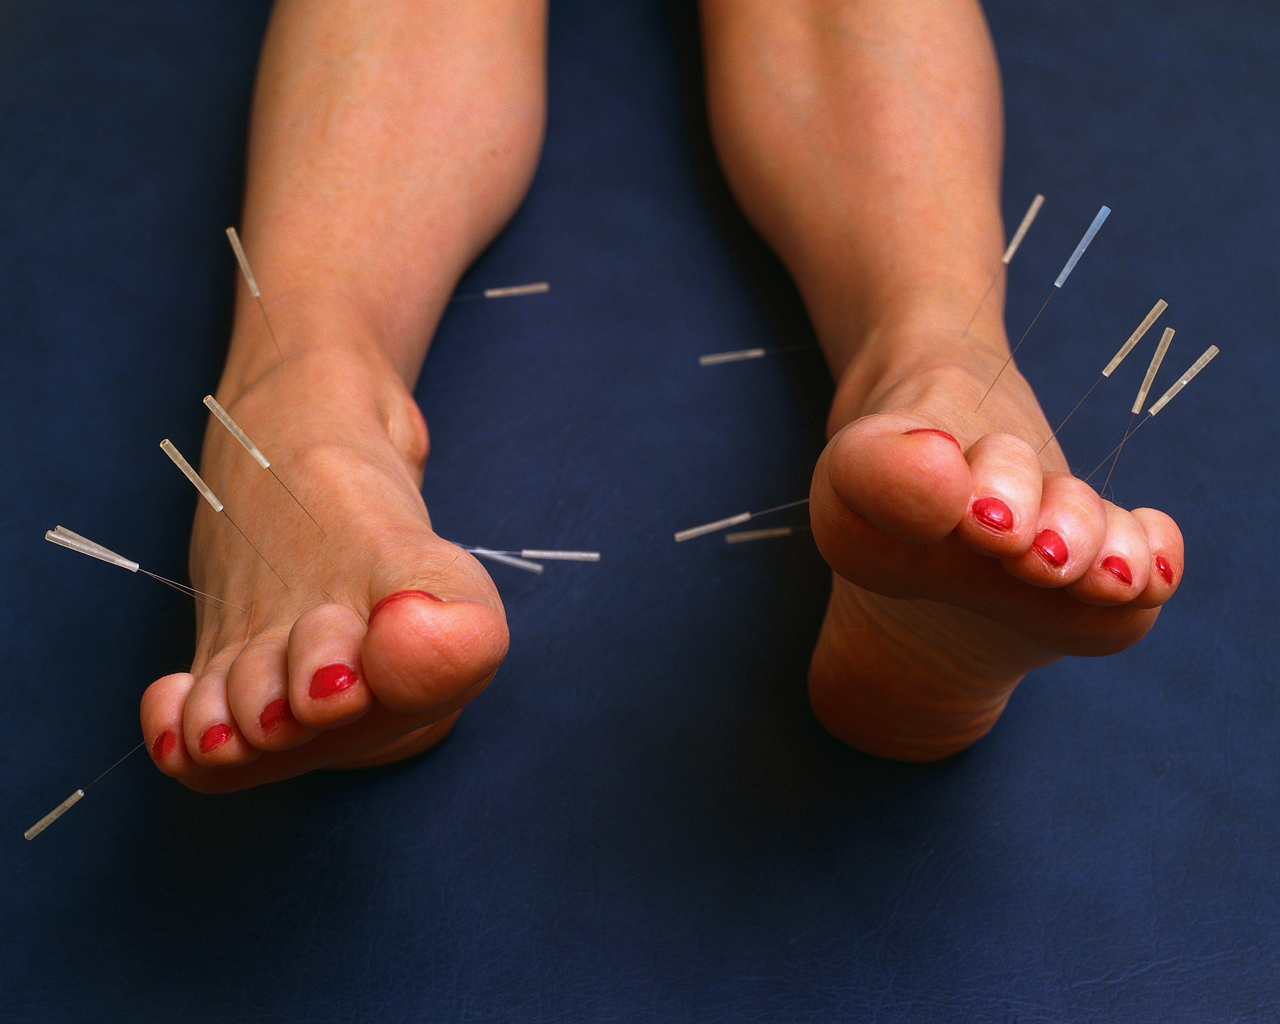 Acupuncture Needles Sticking Out from Feet